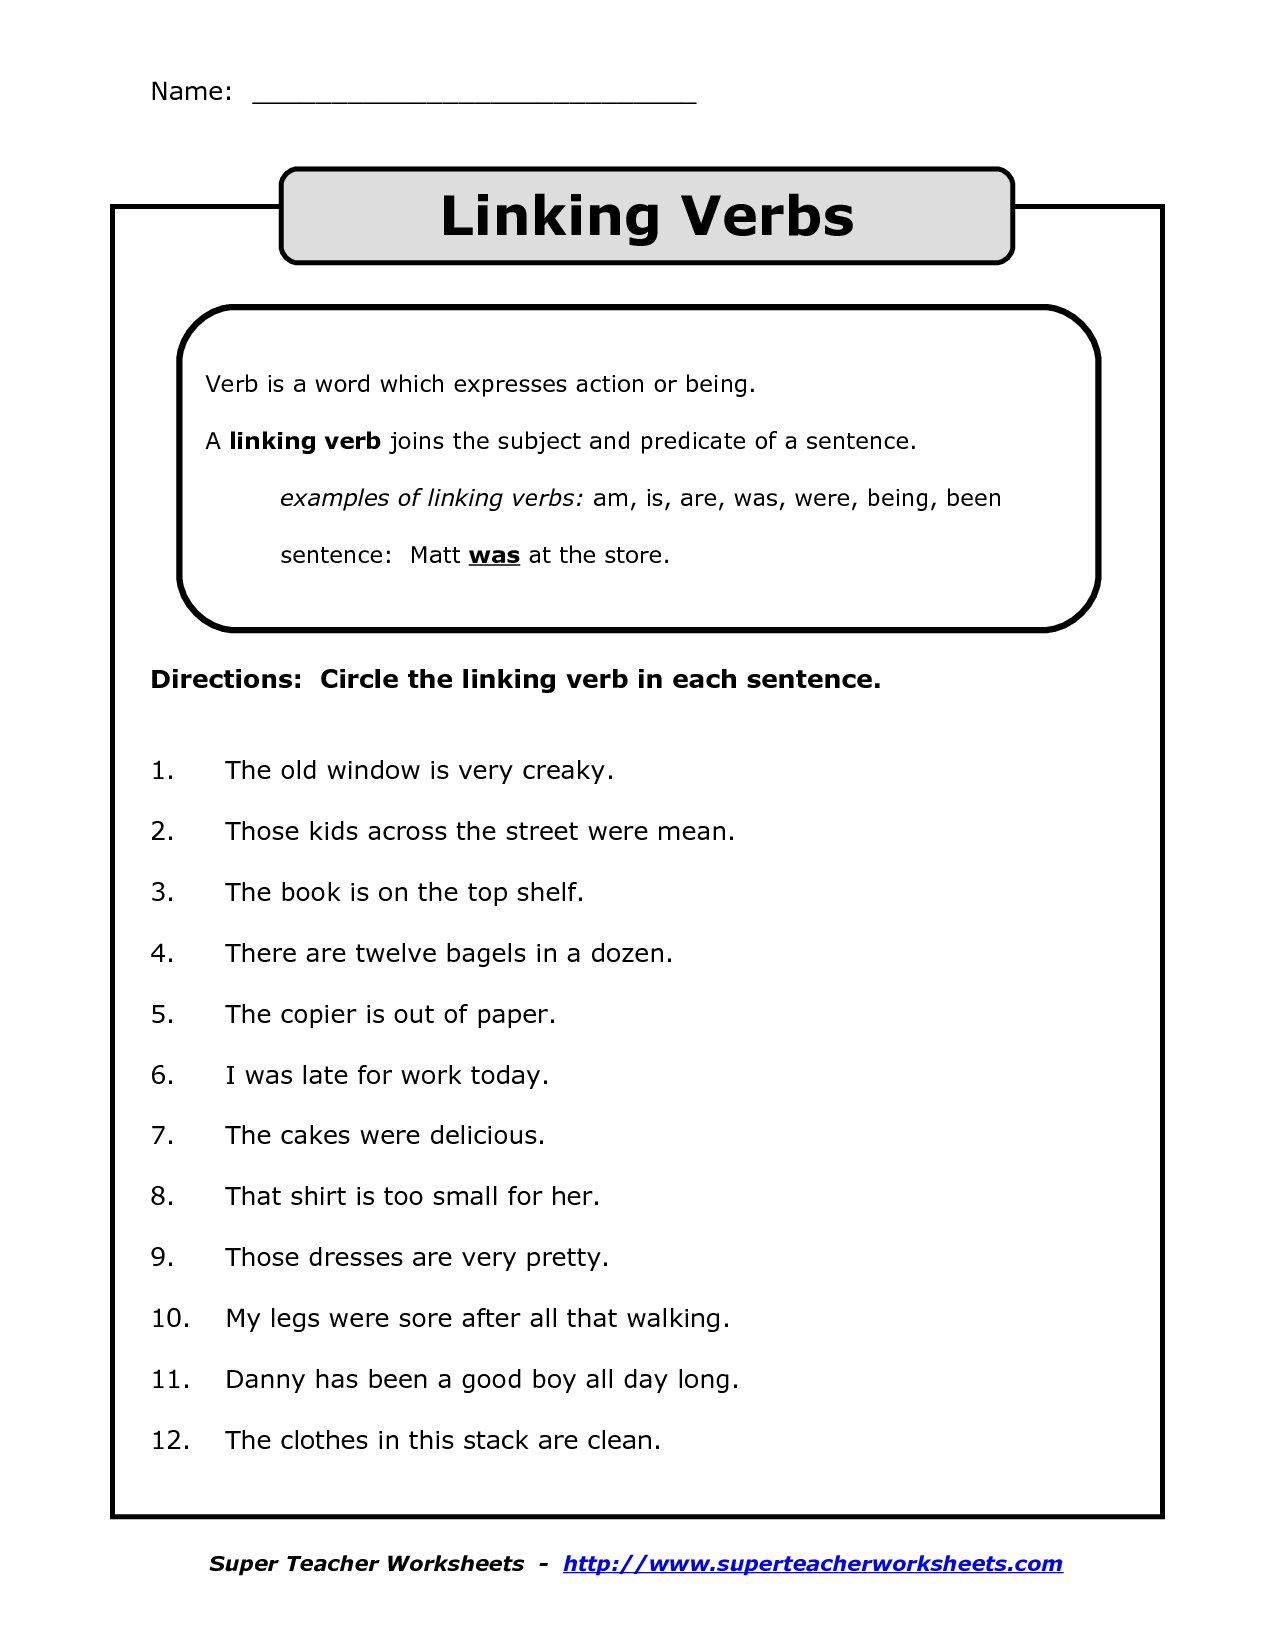 16-best-images-of-action-verb-linking-verb-worksheet-action-and-linking-verbs-worksheets